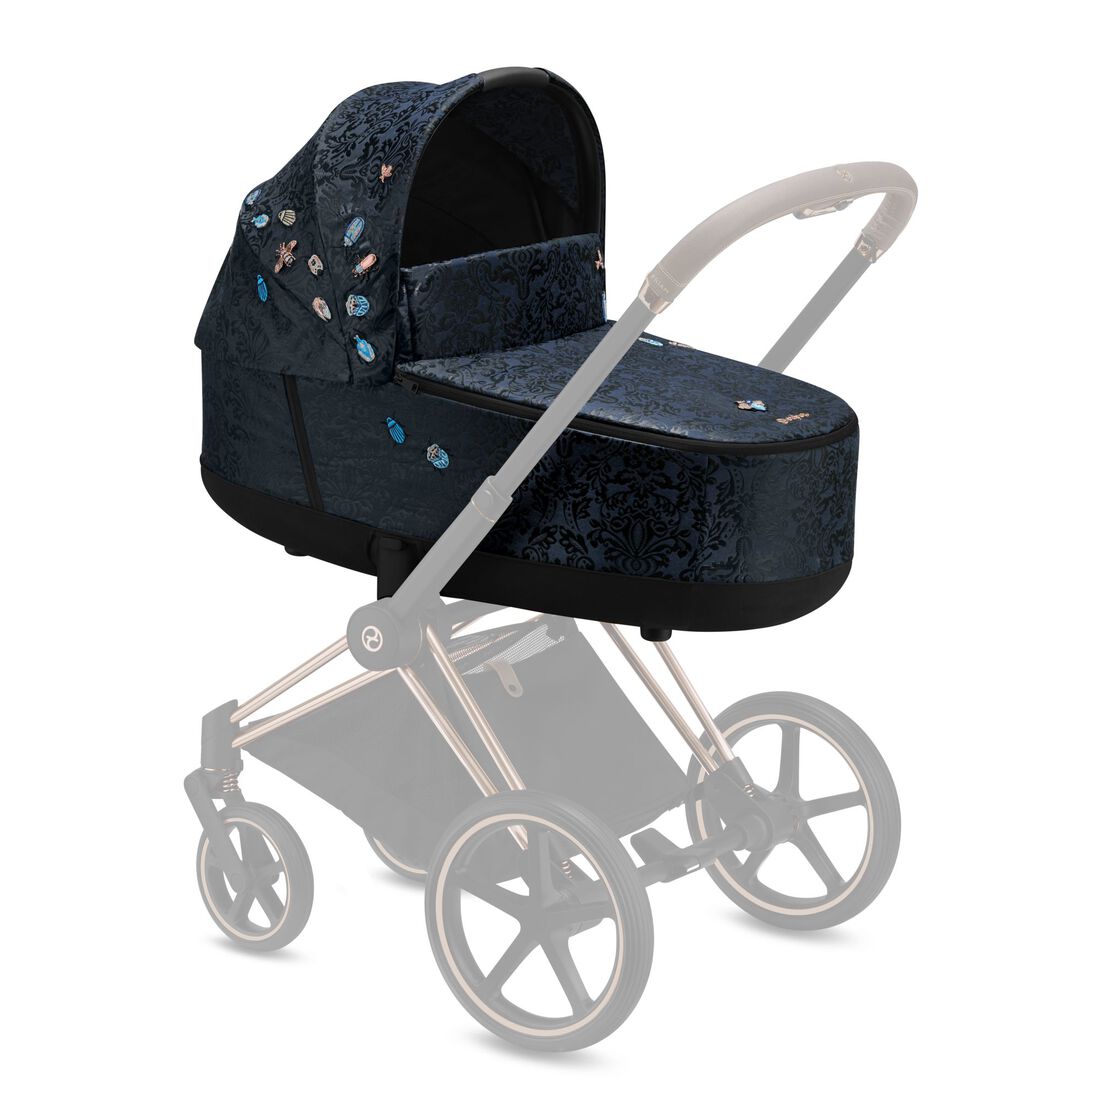 CYBEX Priam 3 Lux Carry Cot - Jewels of Nature in Jewels of Nature large image number 4